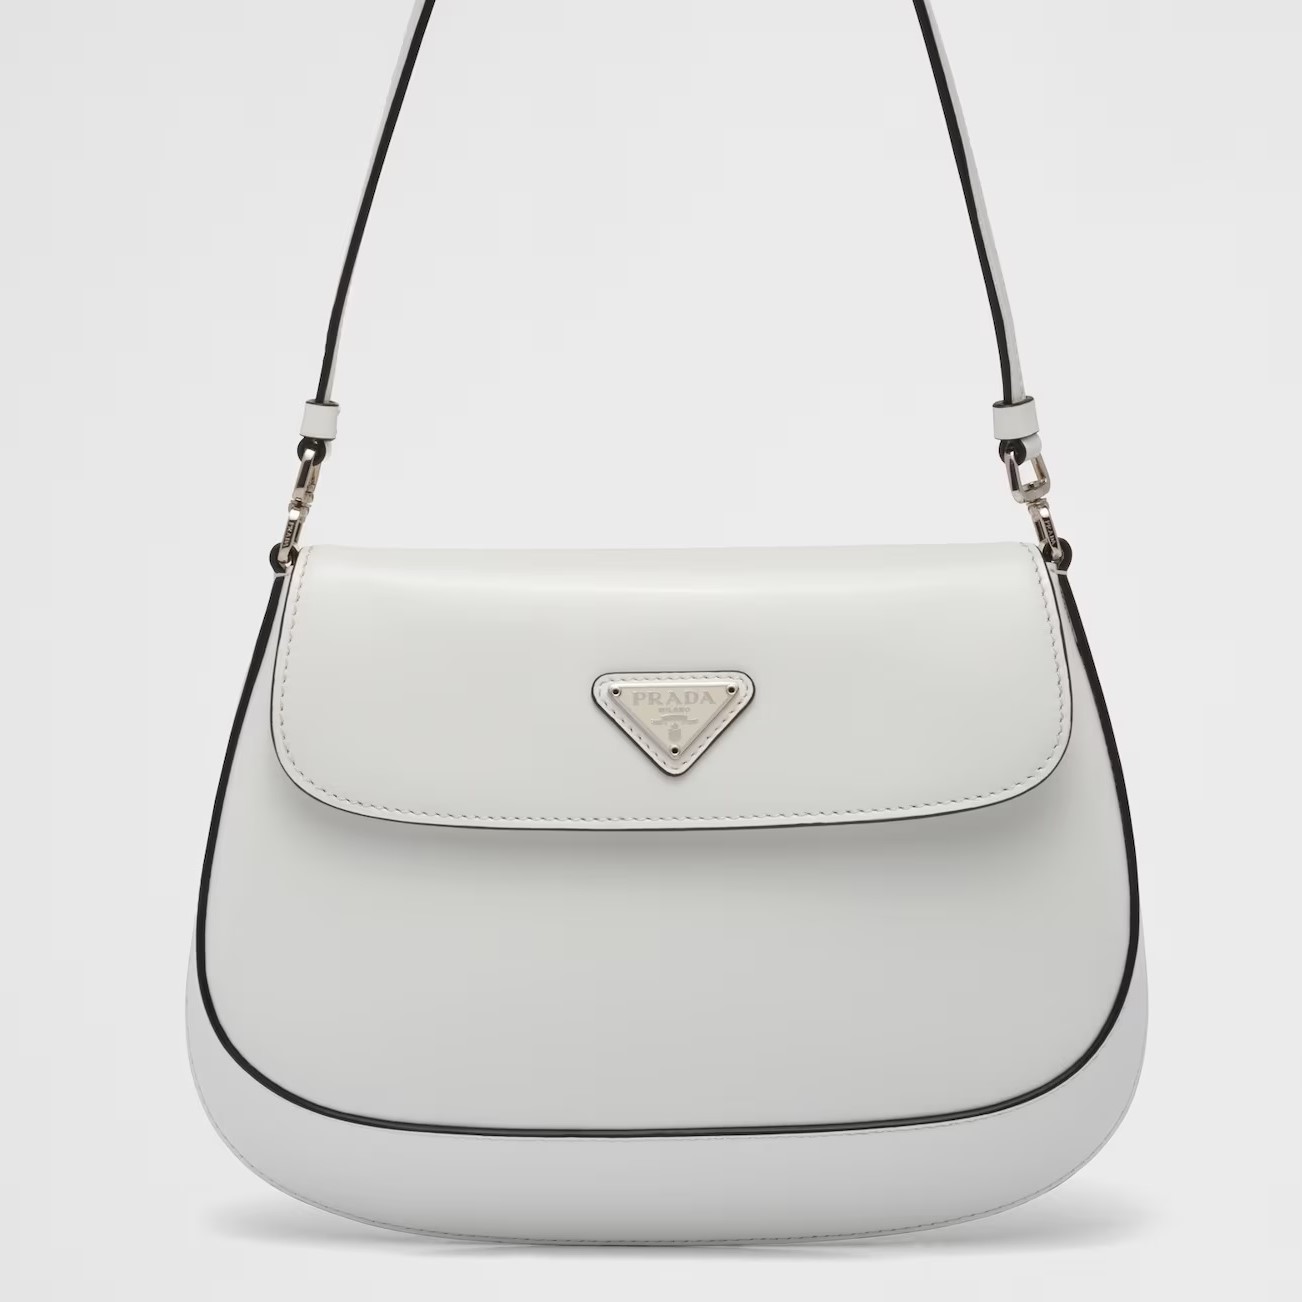 TÚI XÁCH PRADA CLEO BRUSHED LEATHER SHOULDER BAG WITH FLAP 2